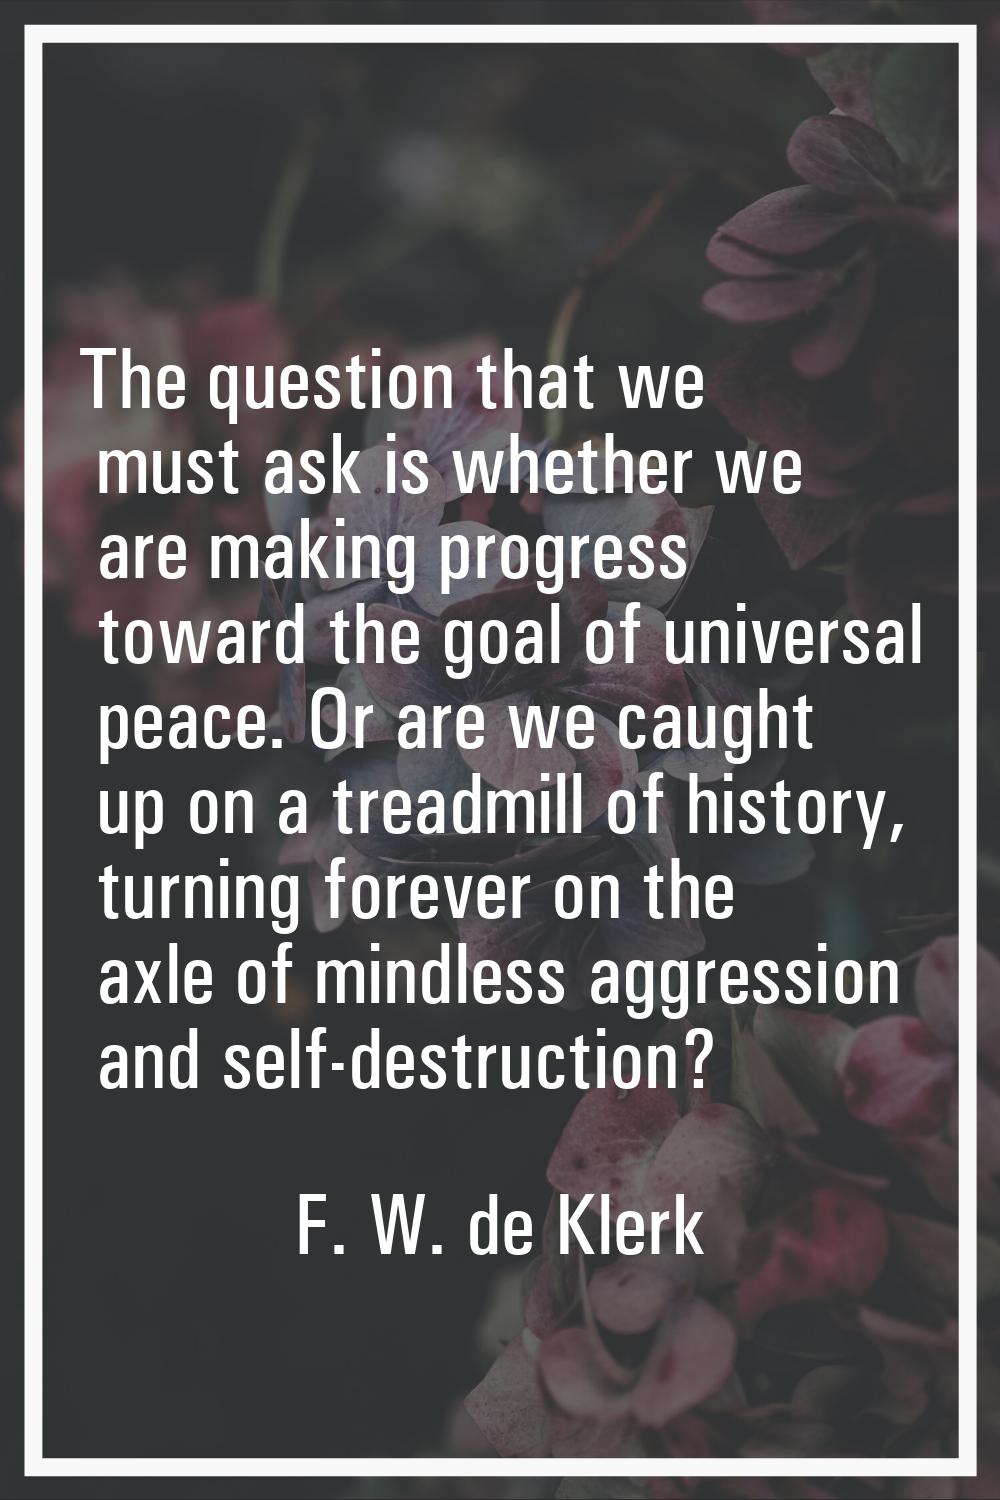 The question that we must ask is whether we are making progress toward the goal of universal peace.